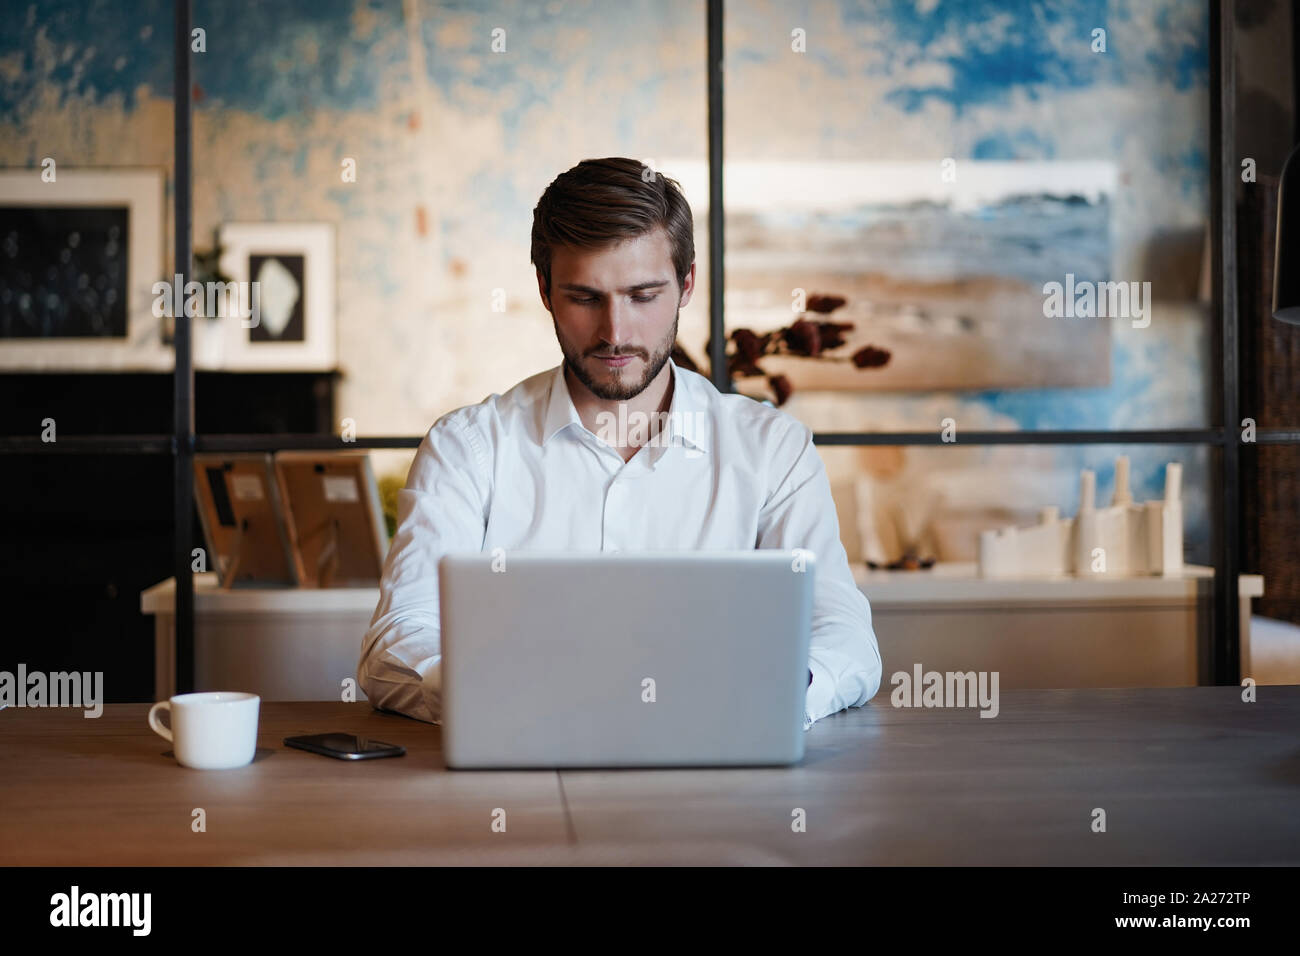 Handsome businessman working with laptop in office Banque D'Images